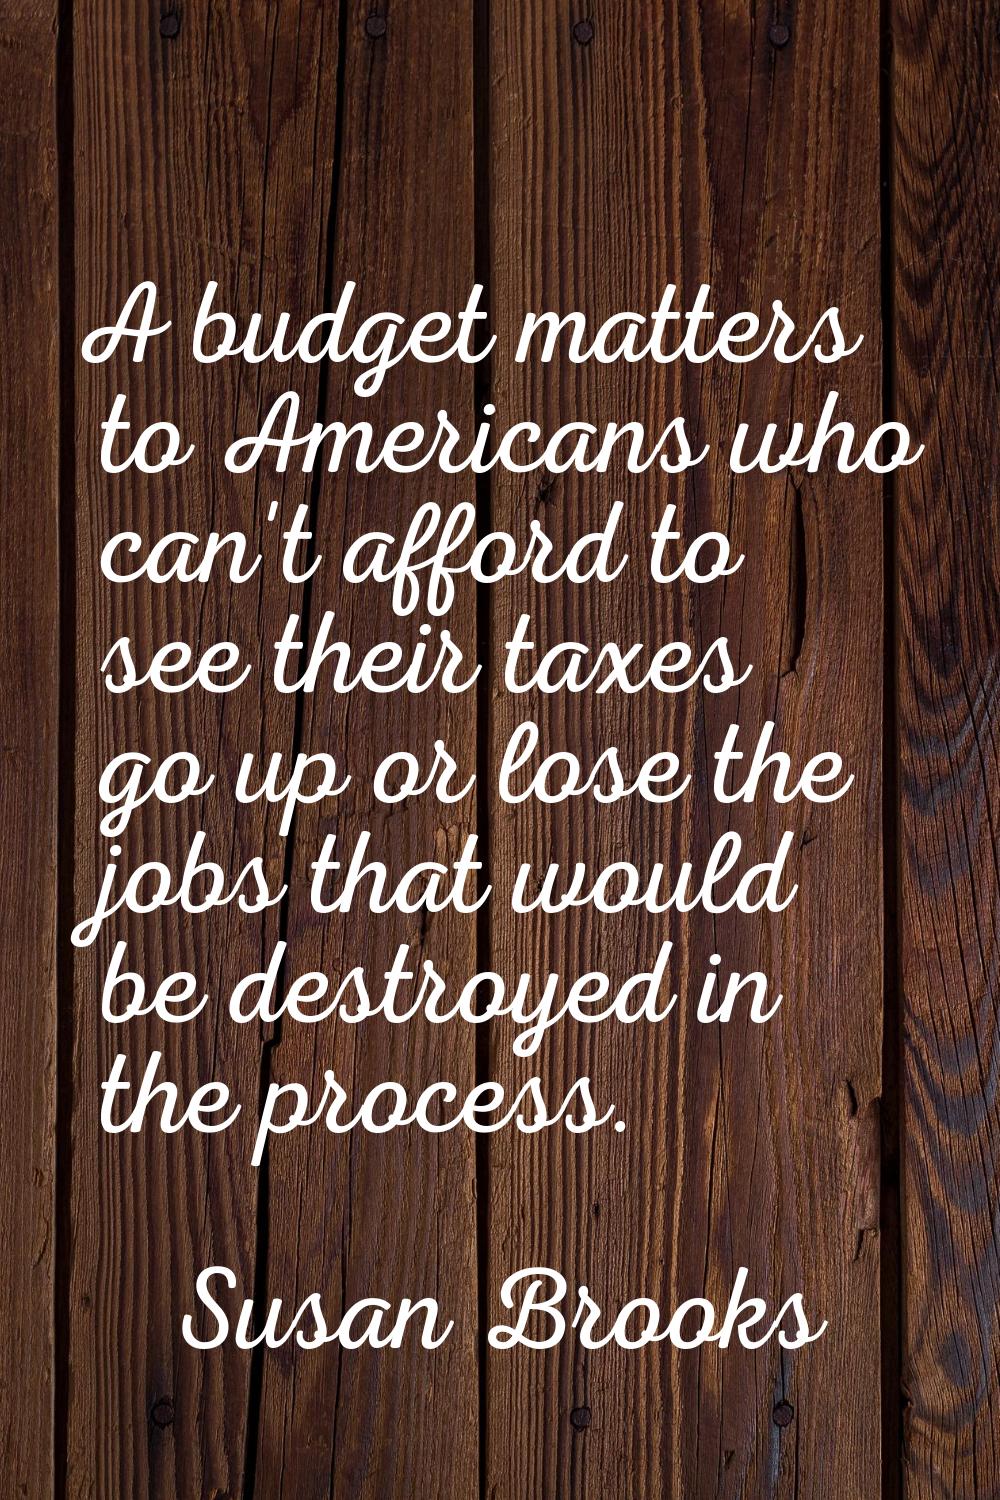 A budget matters to Americans who can't afford to see their taxes go up or lose the jobs that would